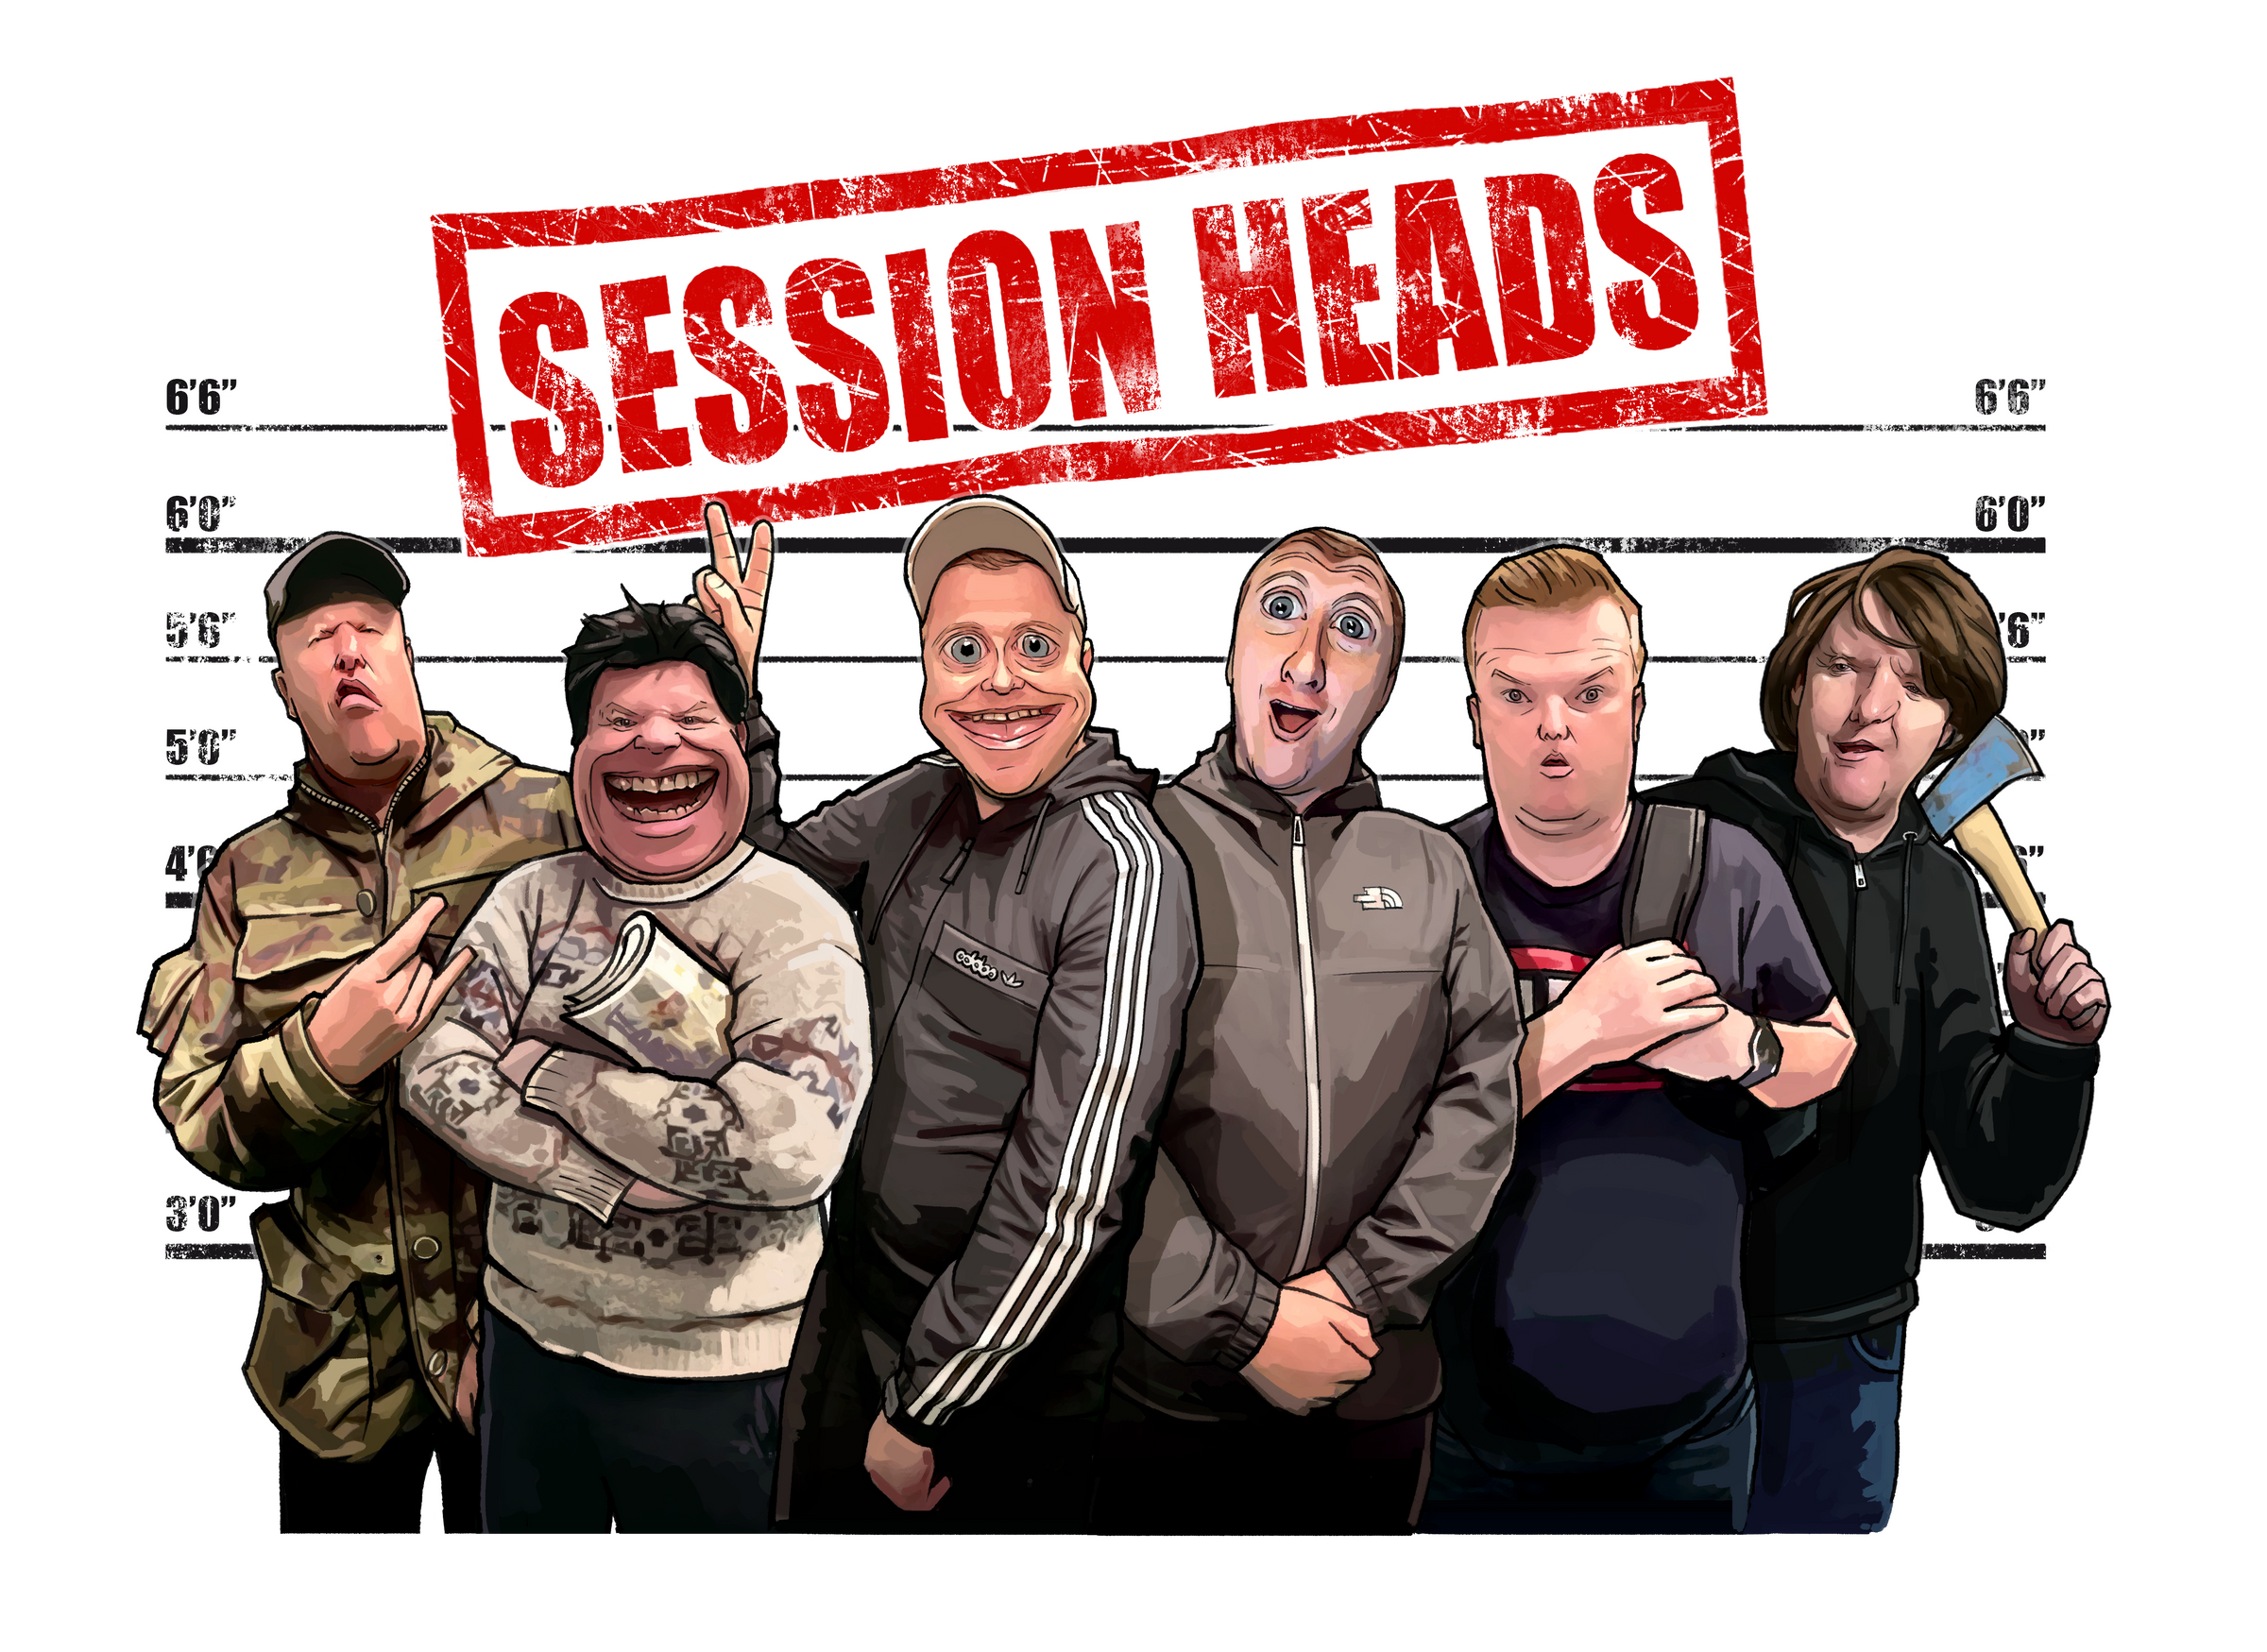 Session Heads